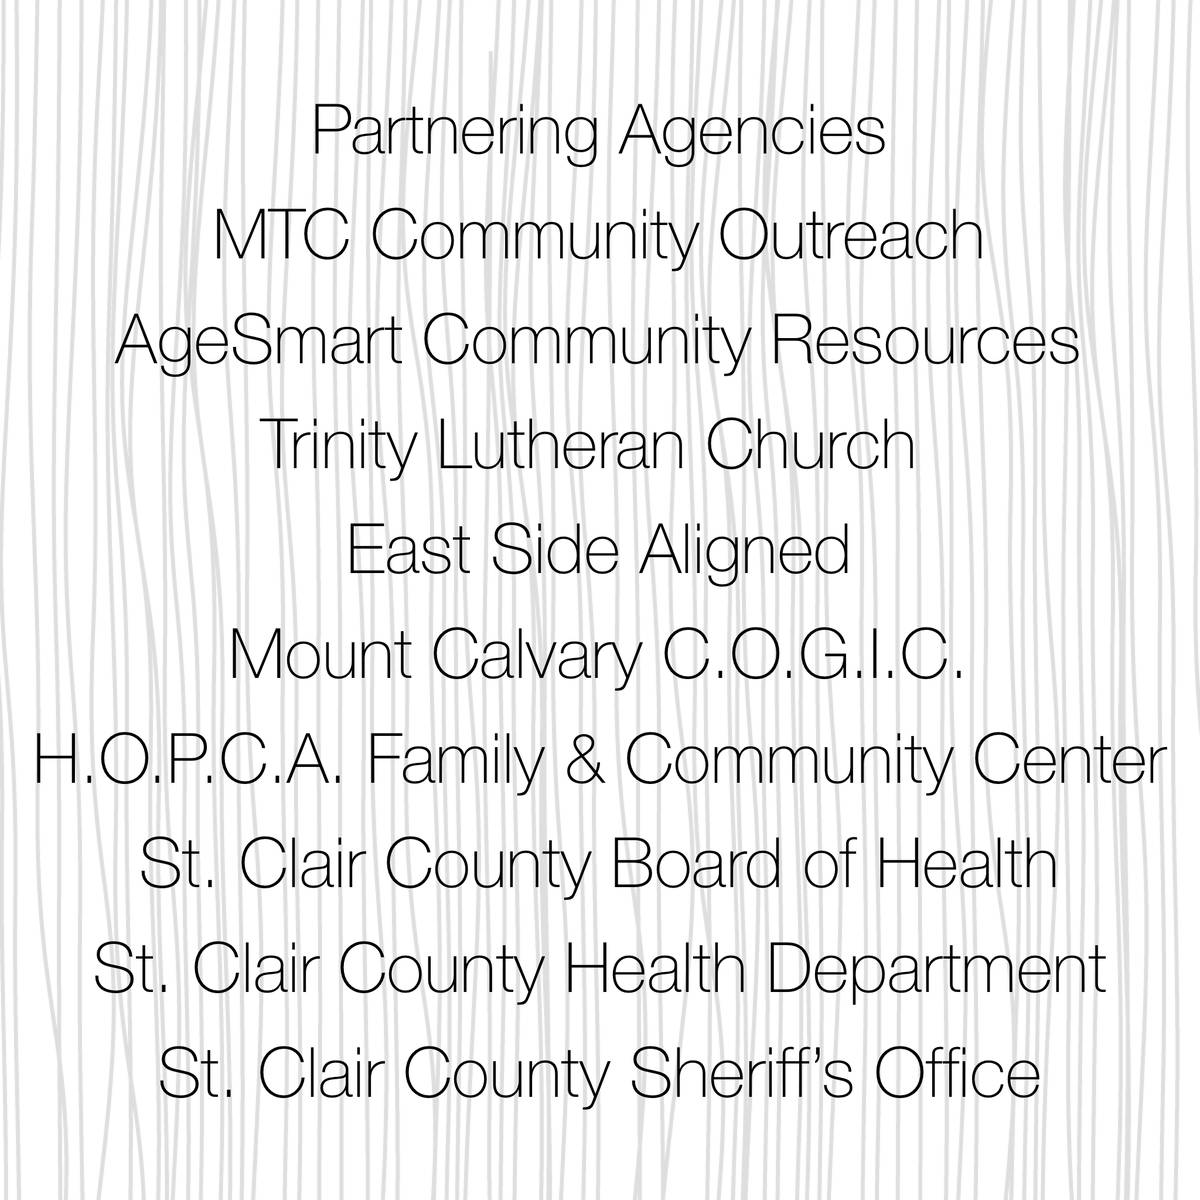 The Community Safety workgroup’s partnering agencies